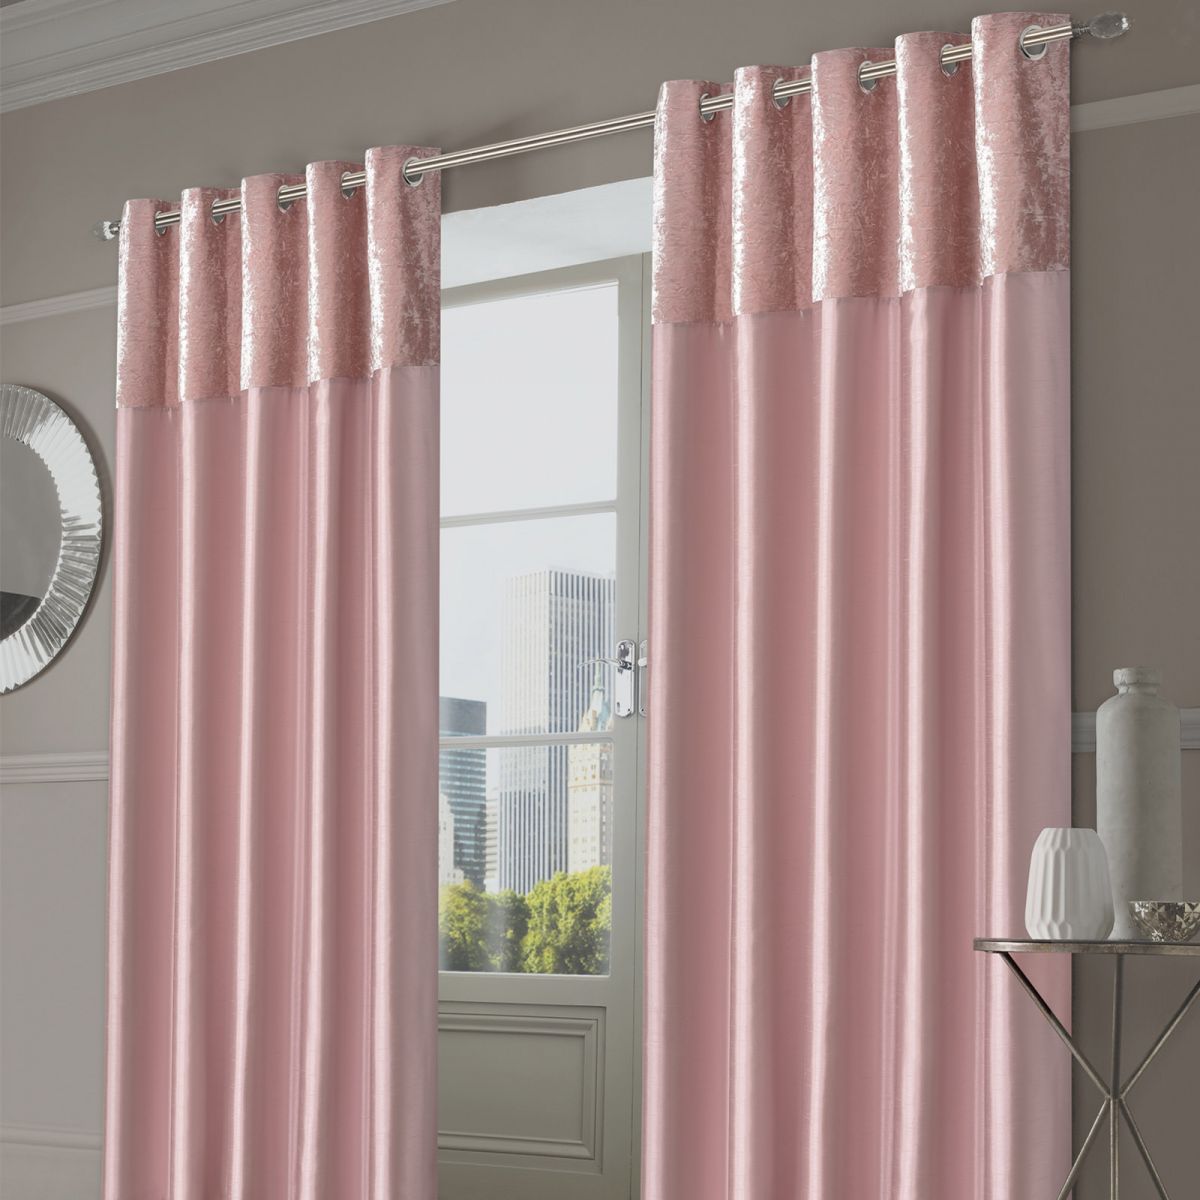 New Manhattan Fully Lined Curtains With Eyelets or Matching Cushion Covers 